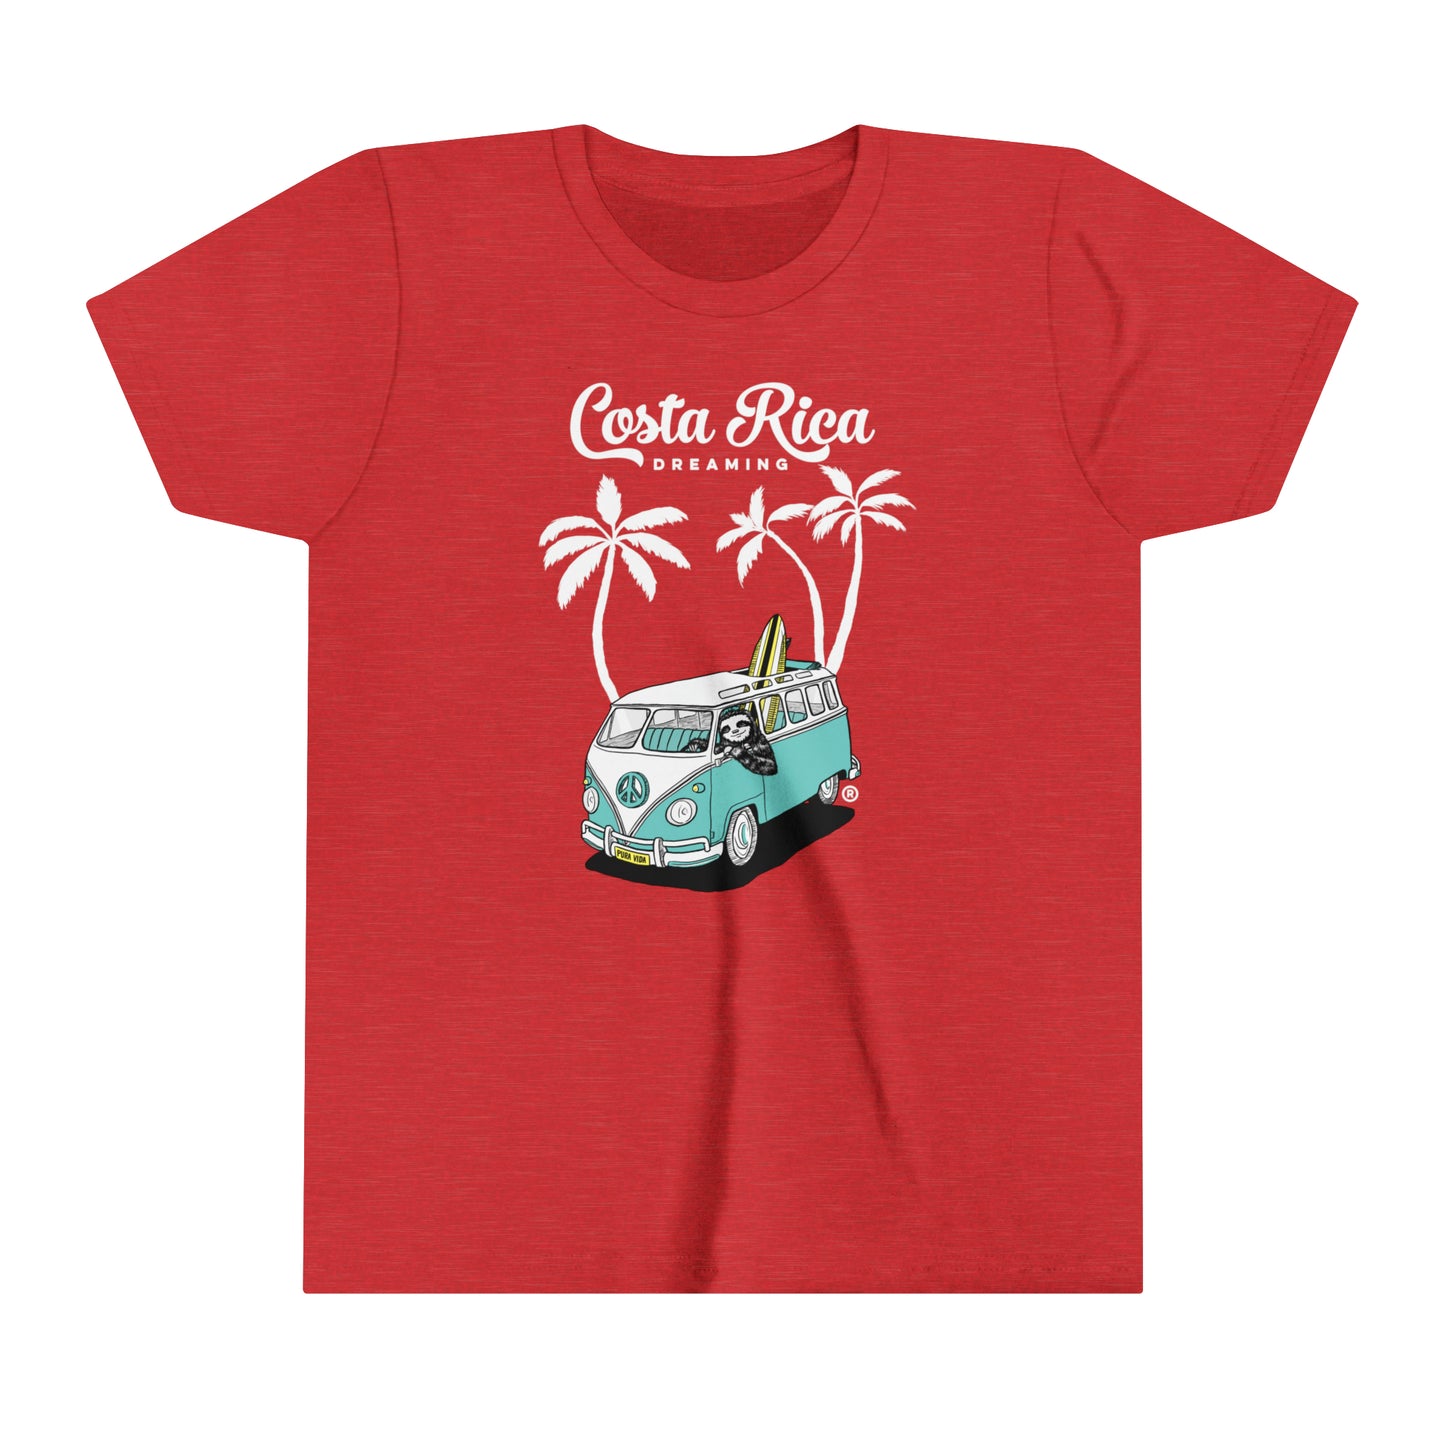 Costa Rica Dreaming Youth Tee